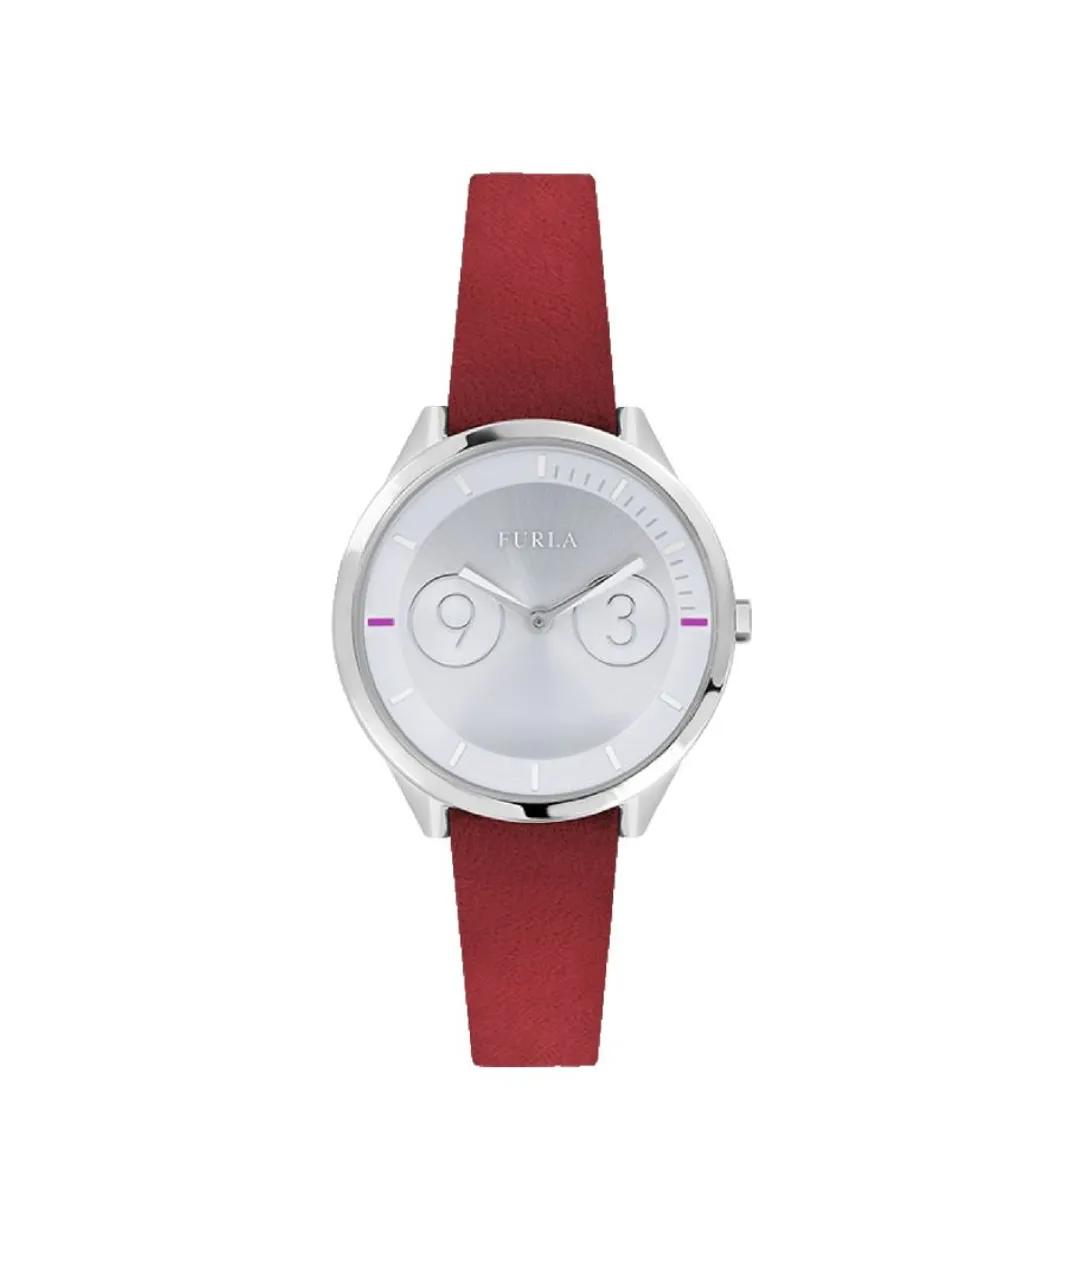 Furla Womens R4251102507 Watch - Red - One Size